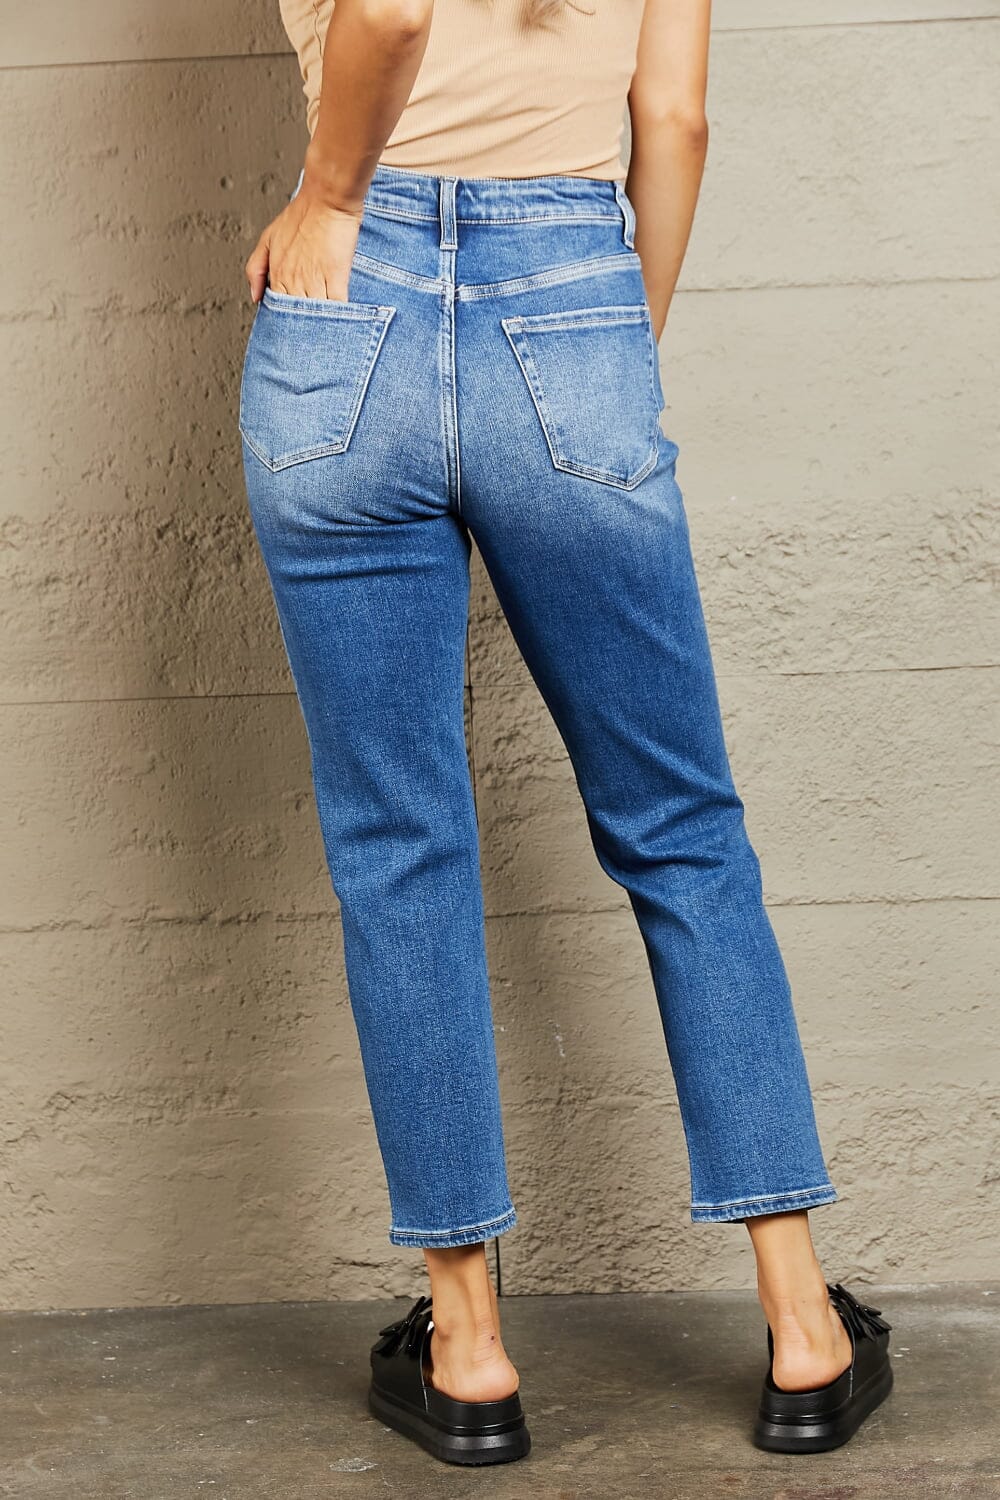 BAYEAS Medium Blue High Waisted Cropped Dad Jeans jeans jehouze 